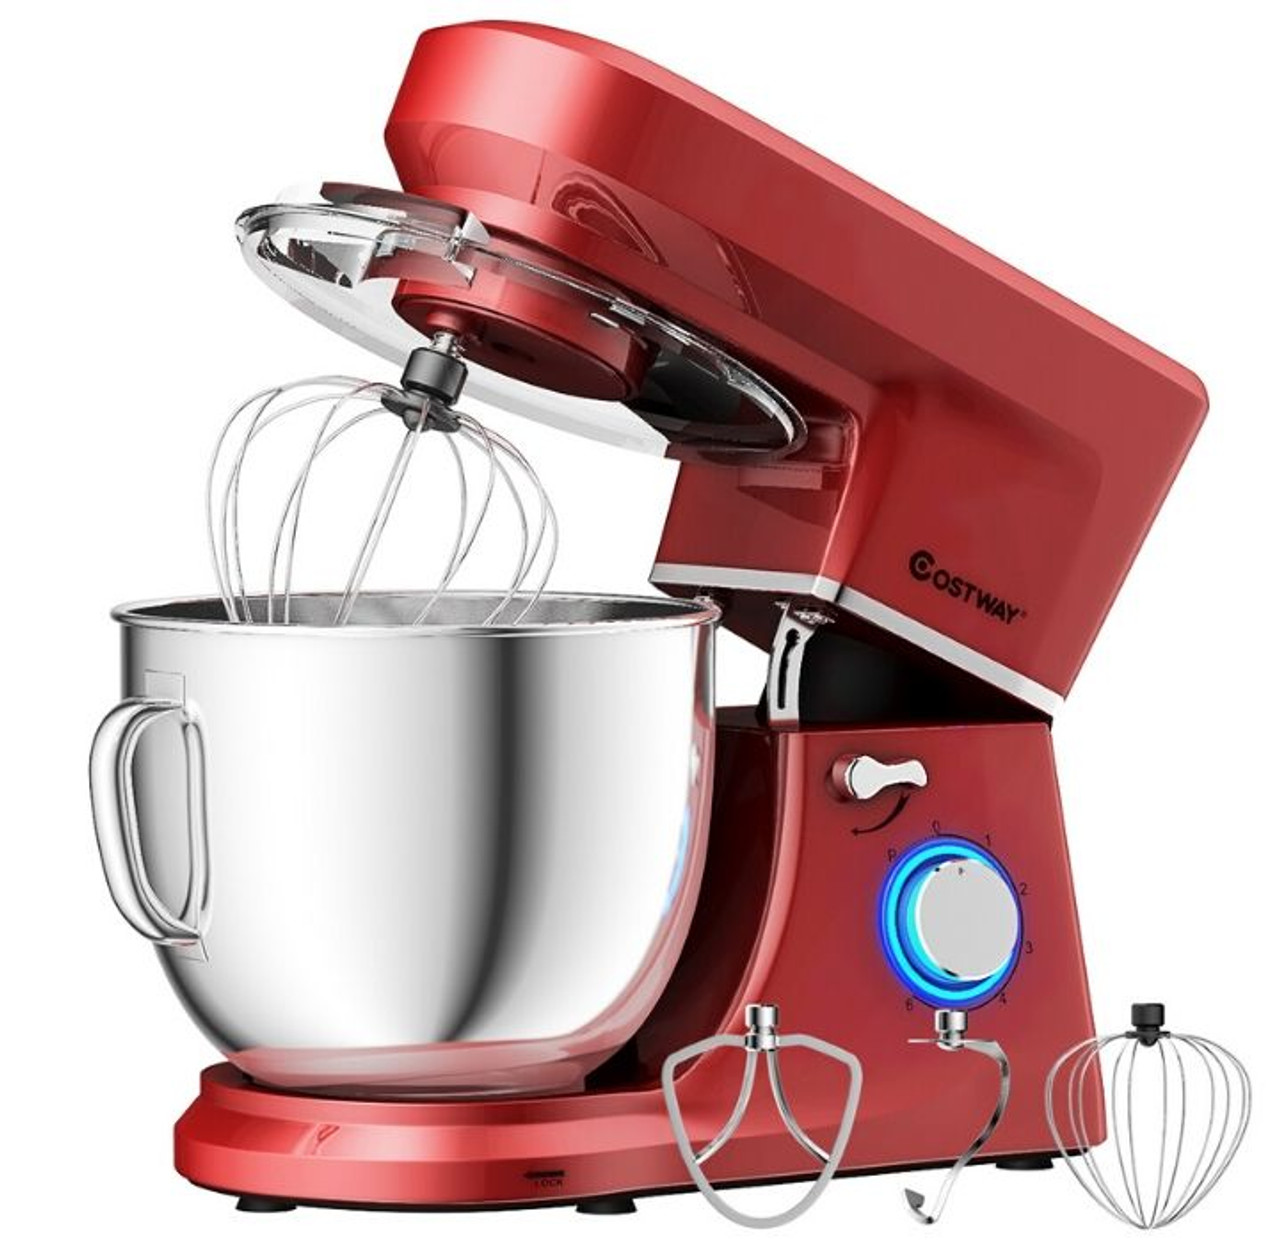 Kitchen Countertop Tilt-Head Food Mixer, Household Stand Stainless-Steel  Dough Mixer w/6 Speeds, 7.5QT Mixing Bowl, Overheat Protection, Red 